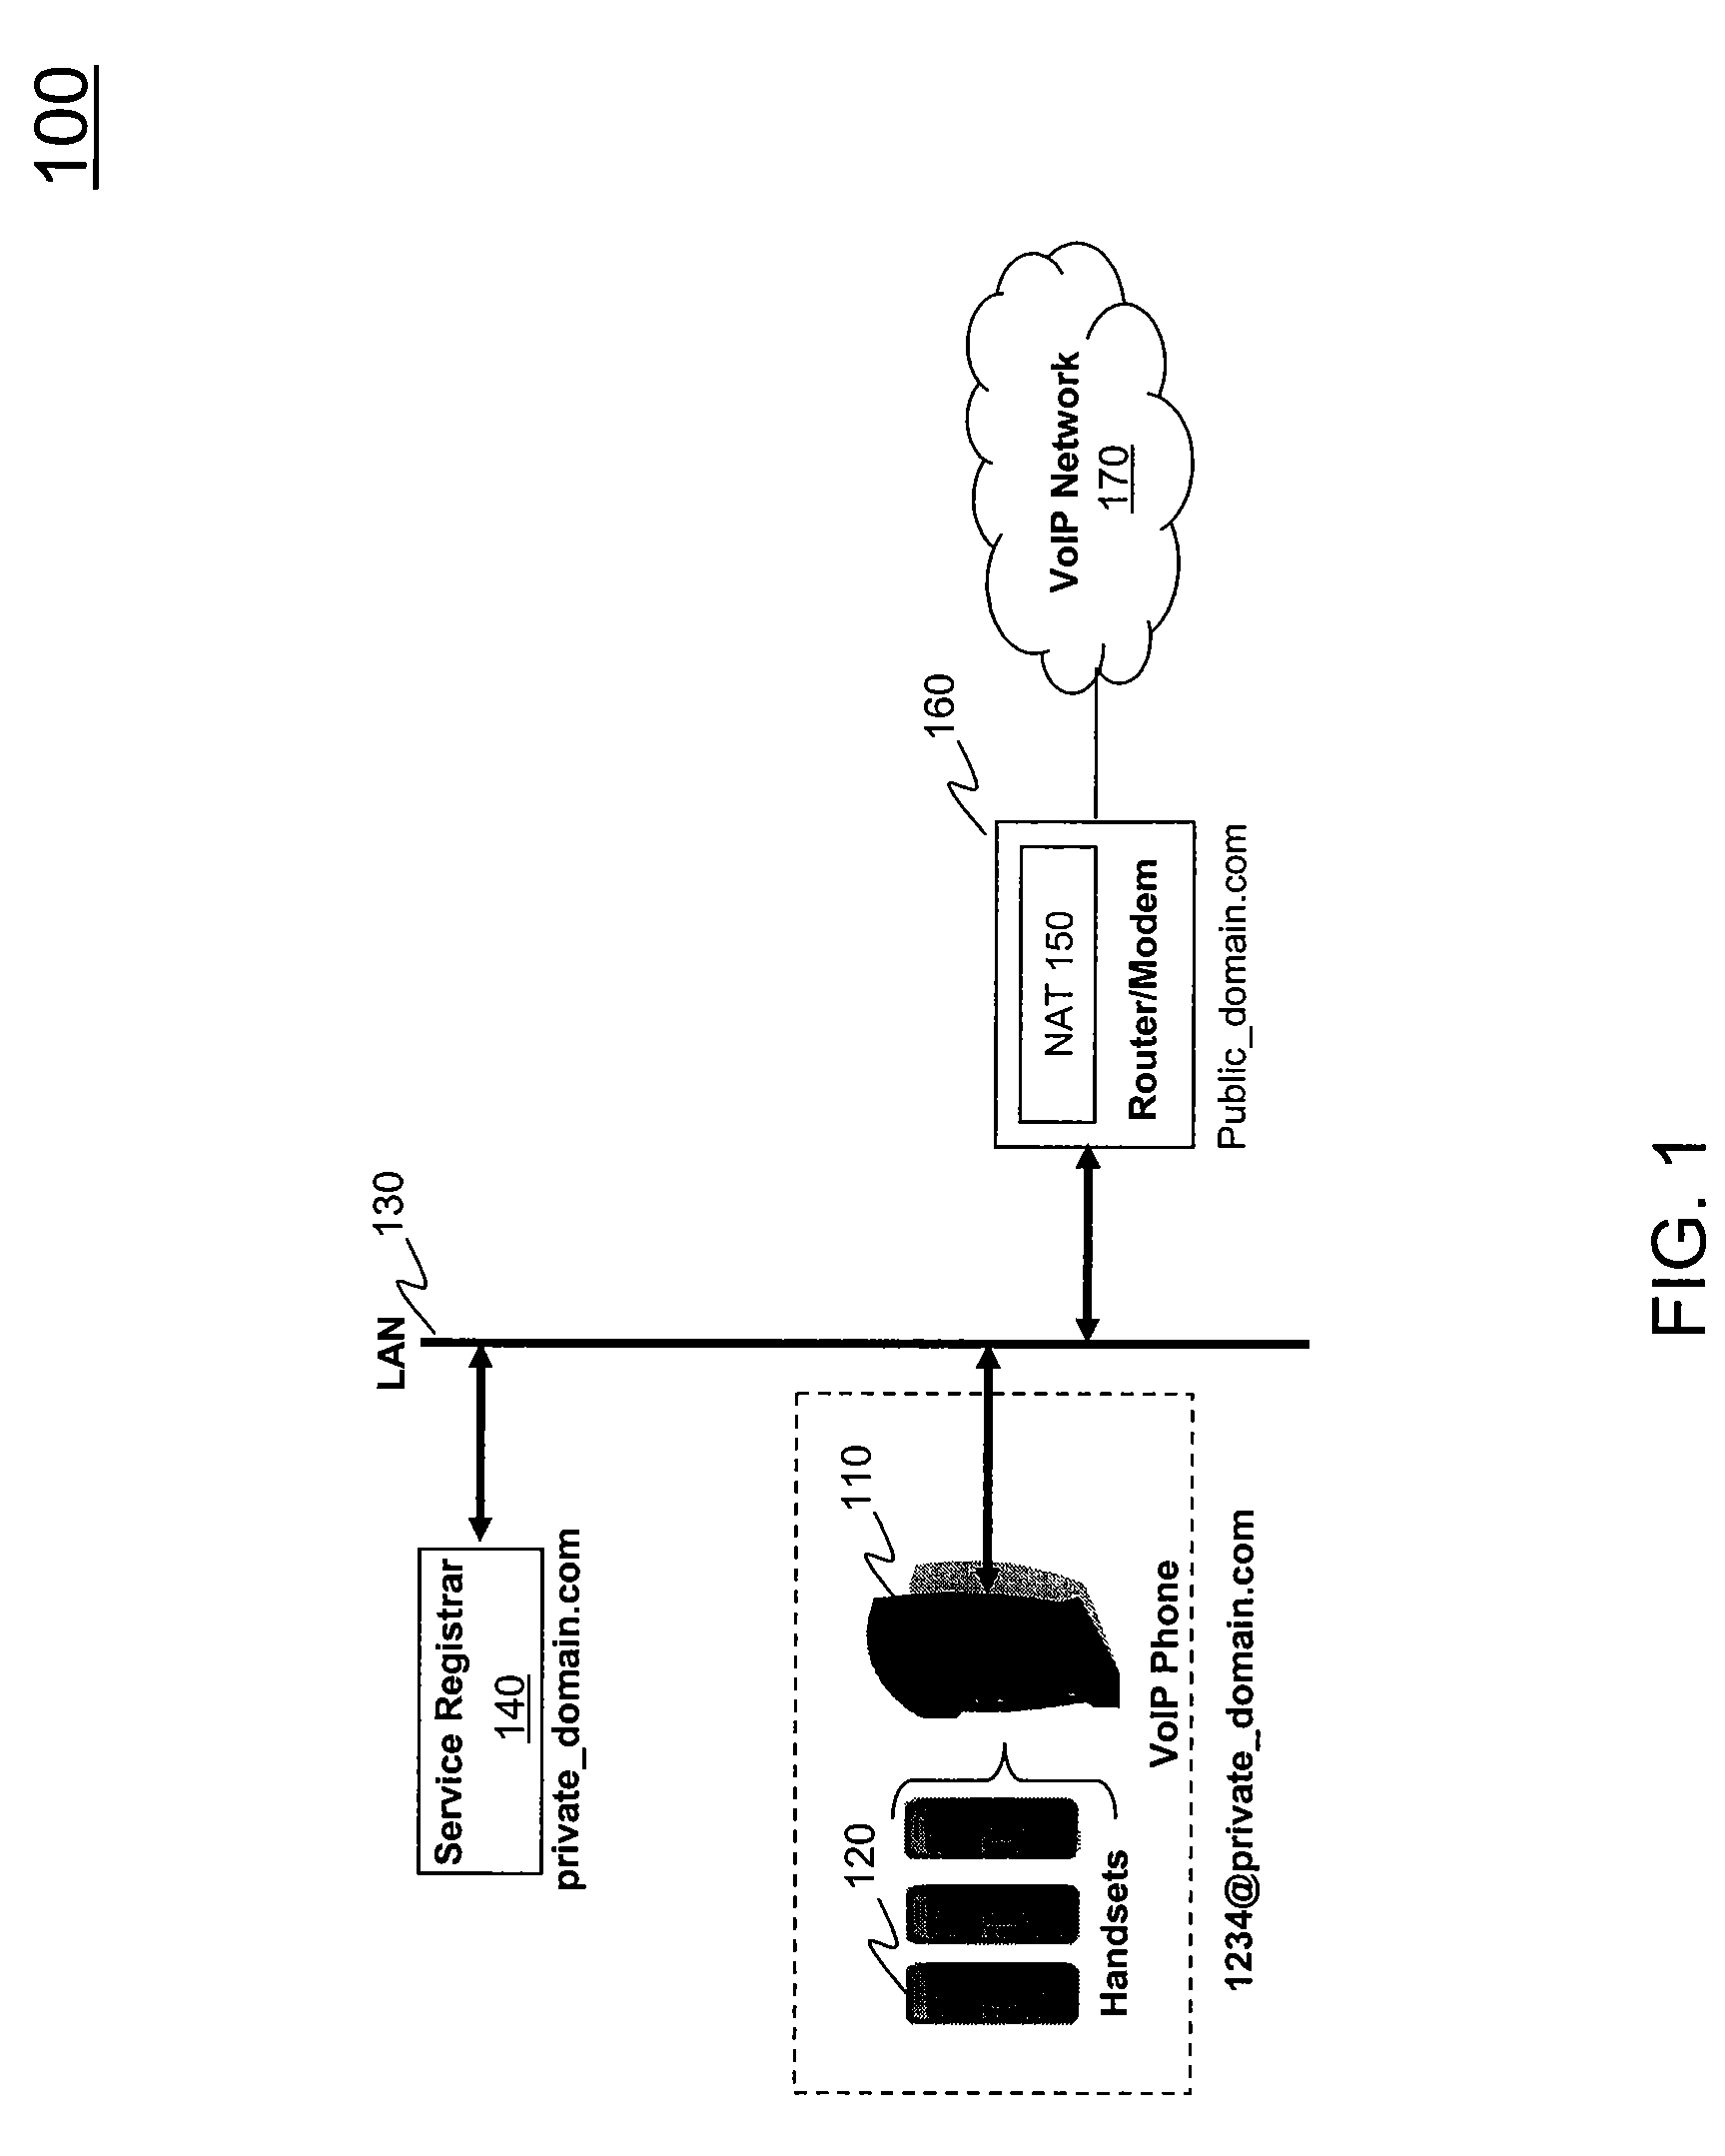 System for supporting analog telephones in an IP telephone network